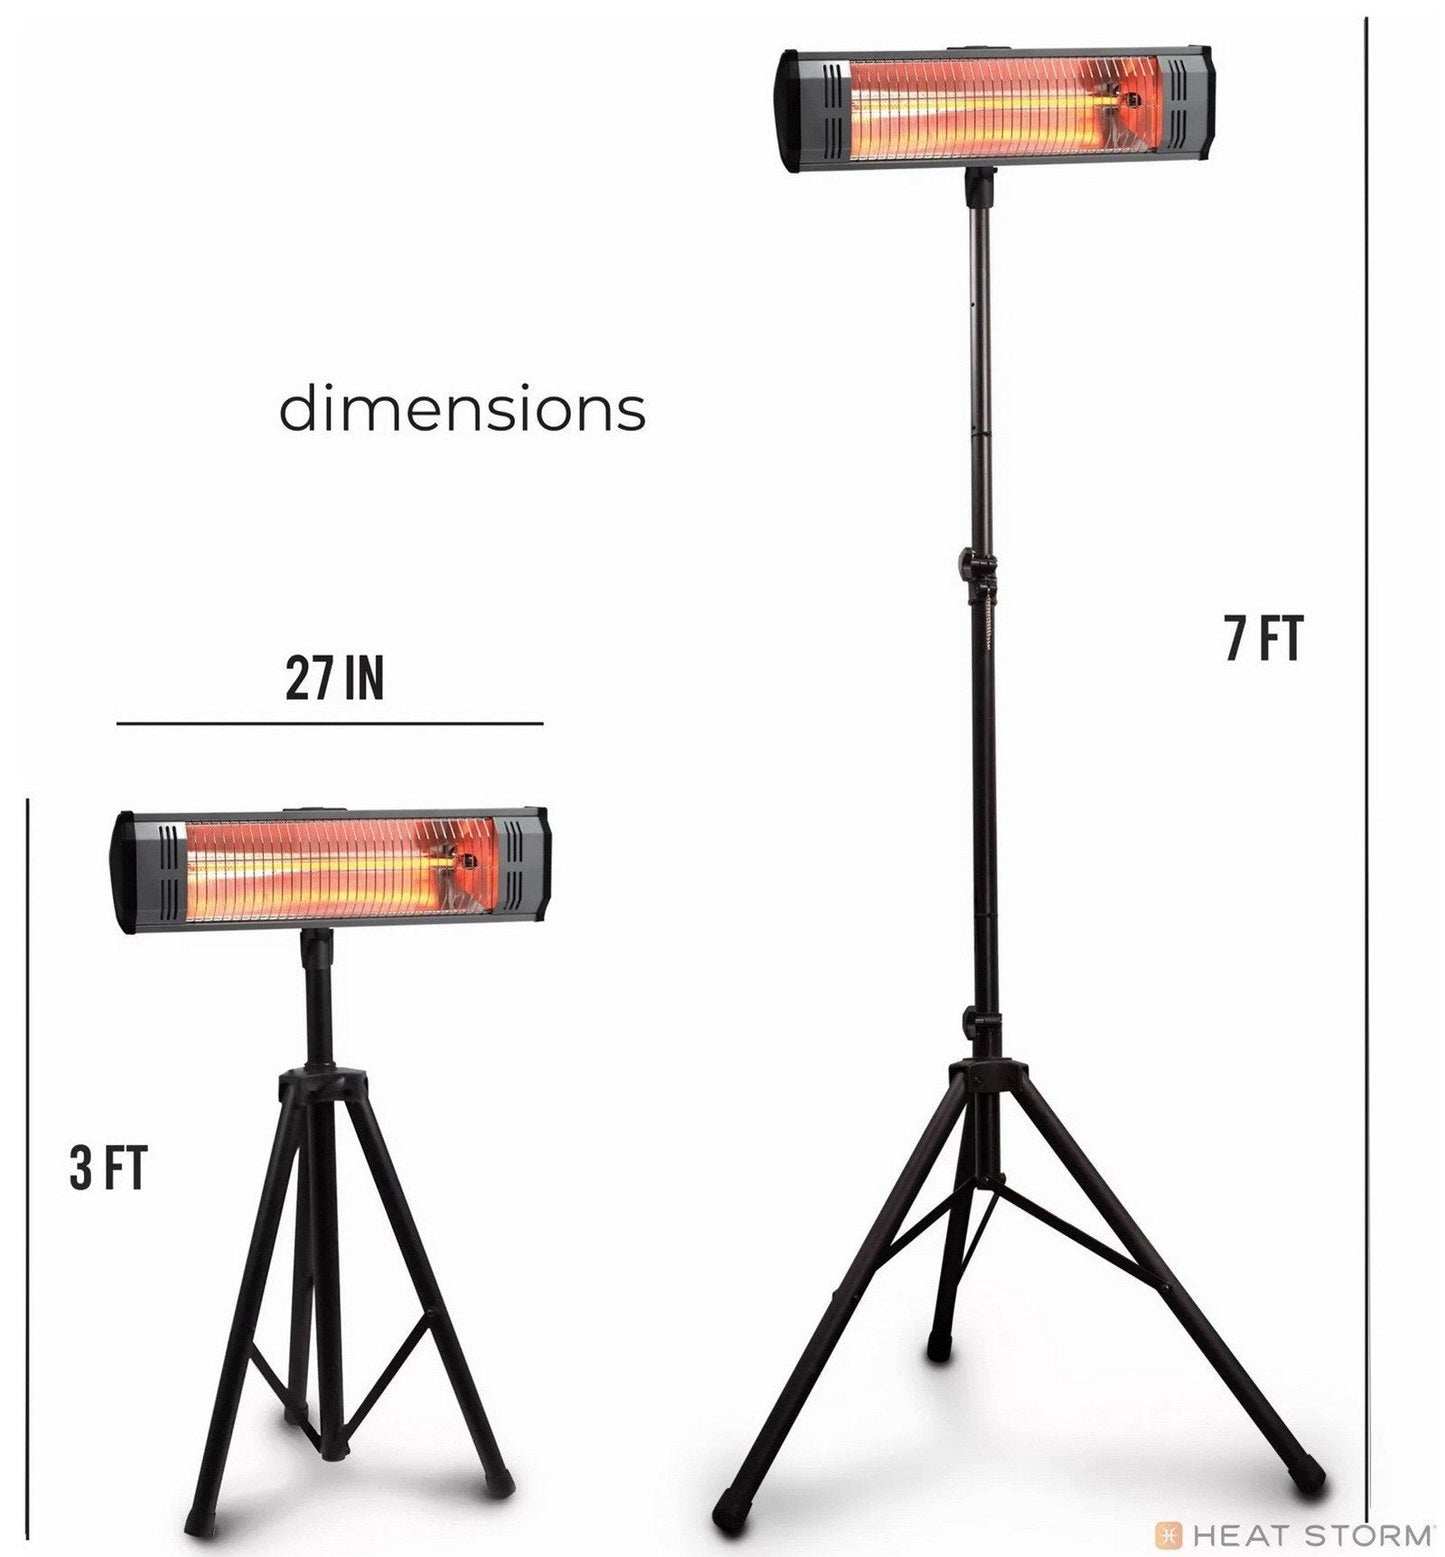 1500W Electric Outdoor Infrared Space Heater Portable with Tripod Heat Storm